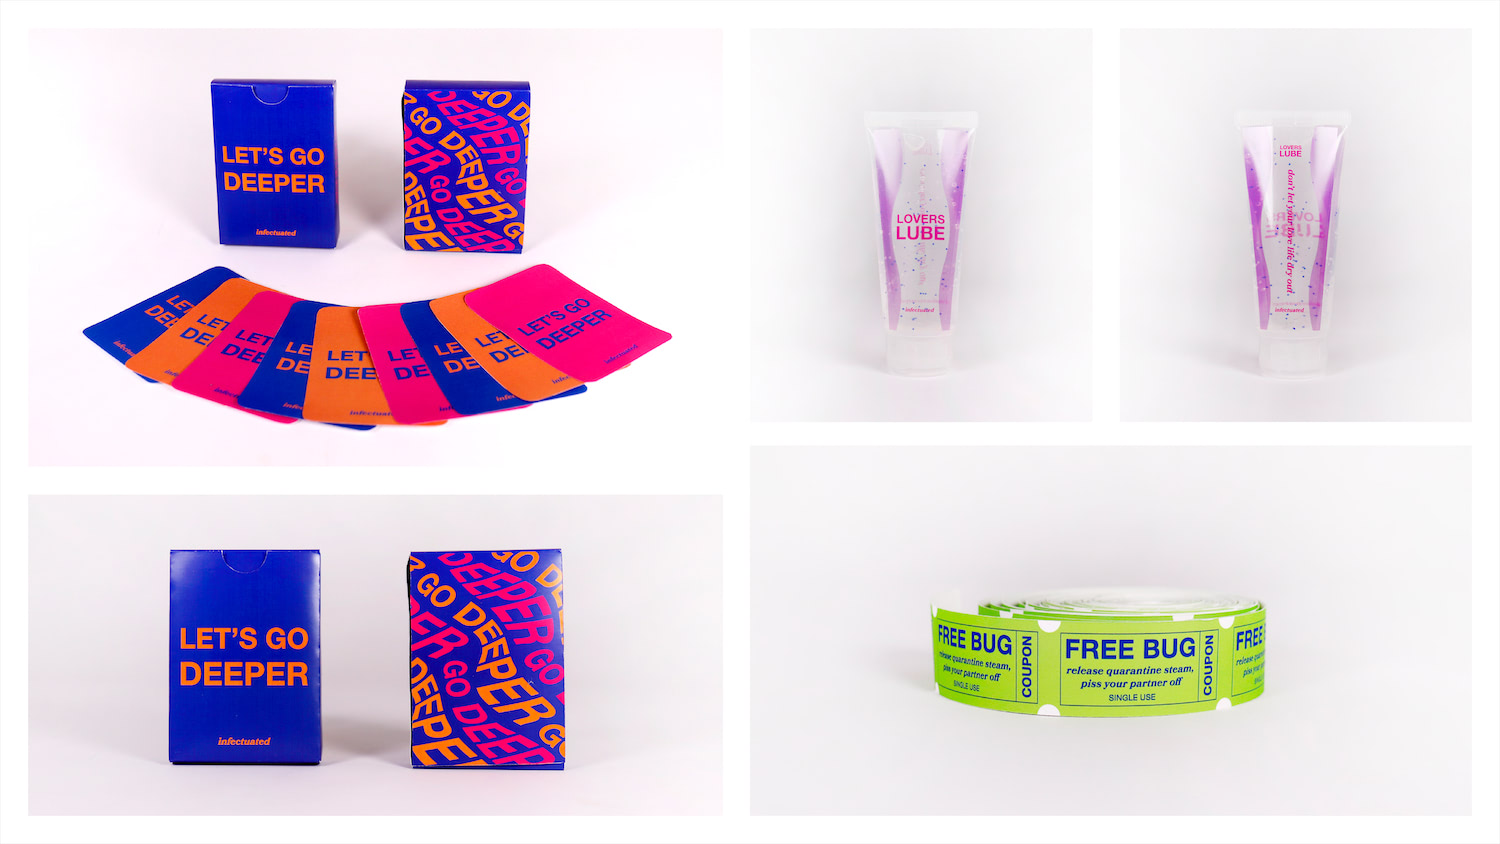 COMMITTED-19 Products: a card game, lovers lube, free bug coupons, and a mask.